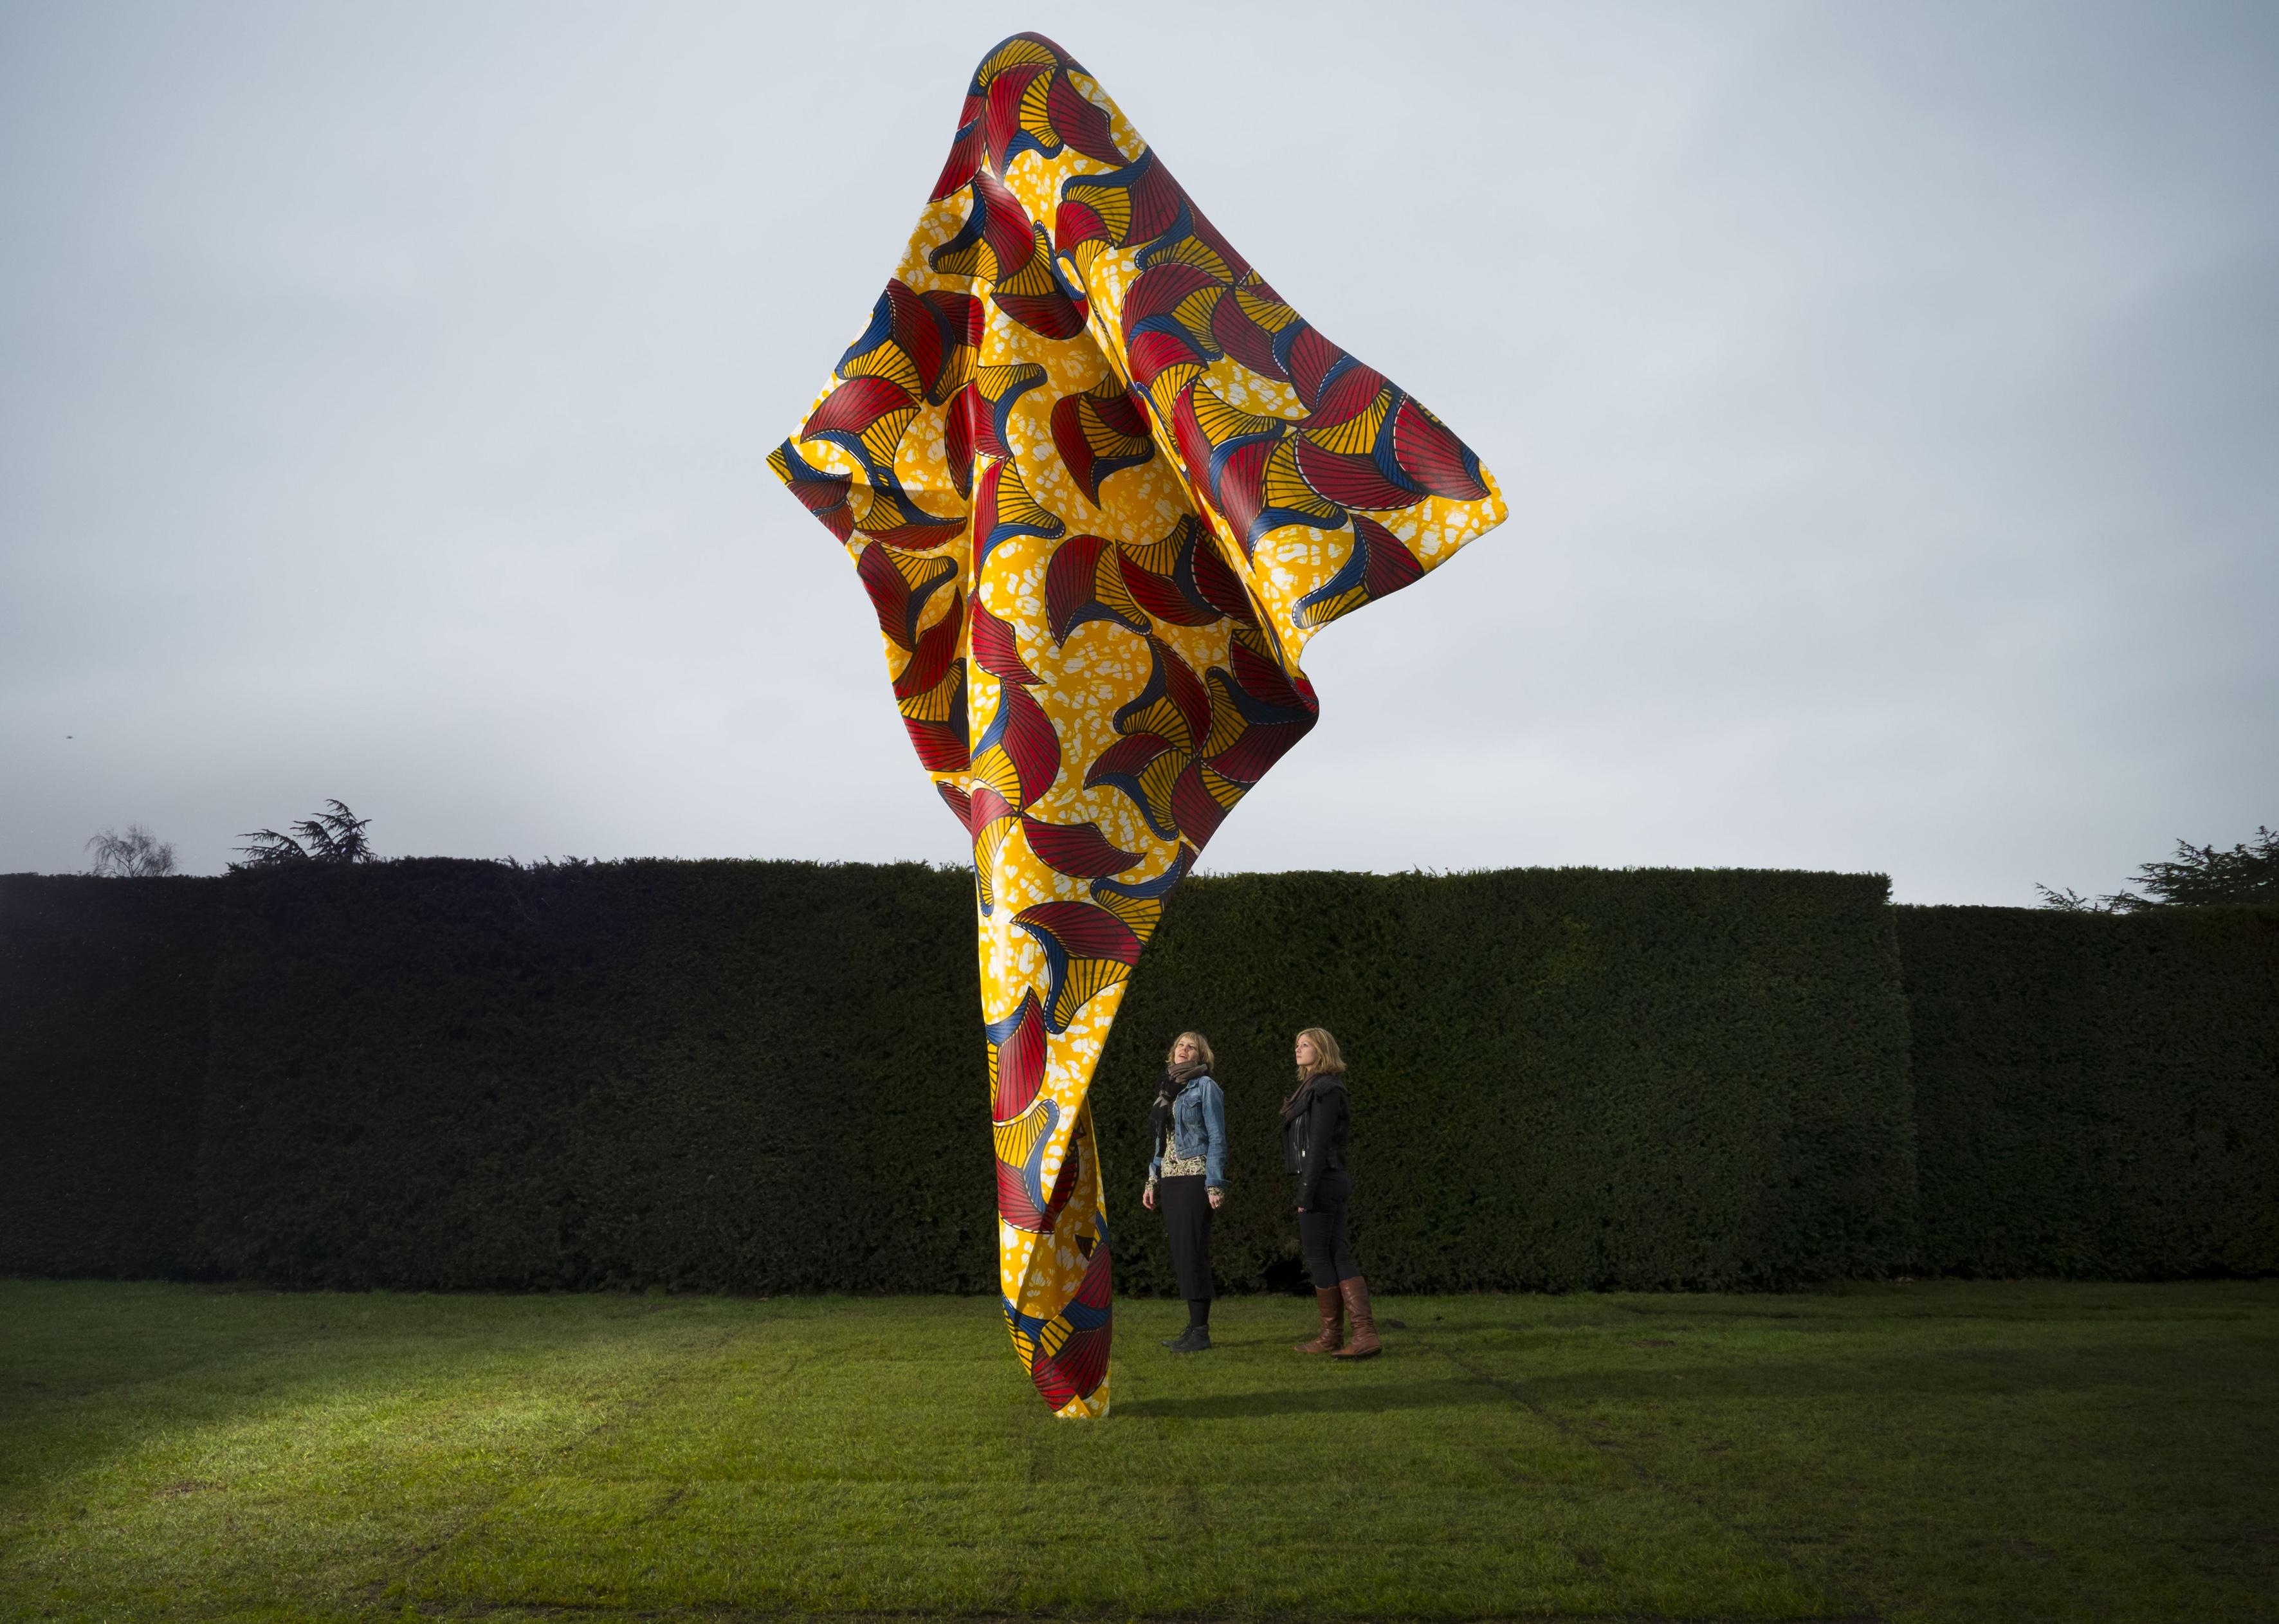 A giant sculpture resembling tussled fabric stands upright in a manicured lawn